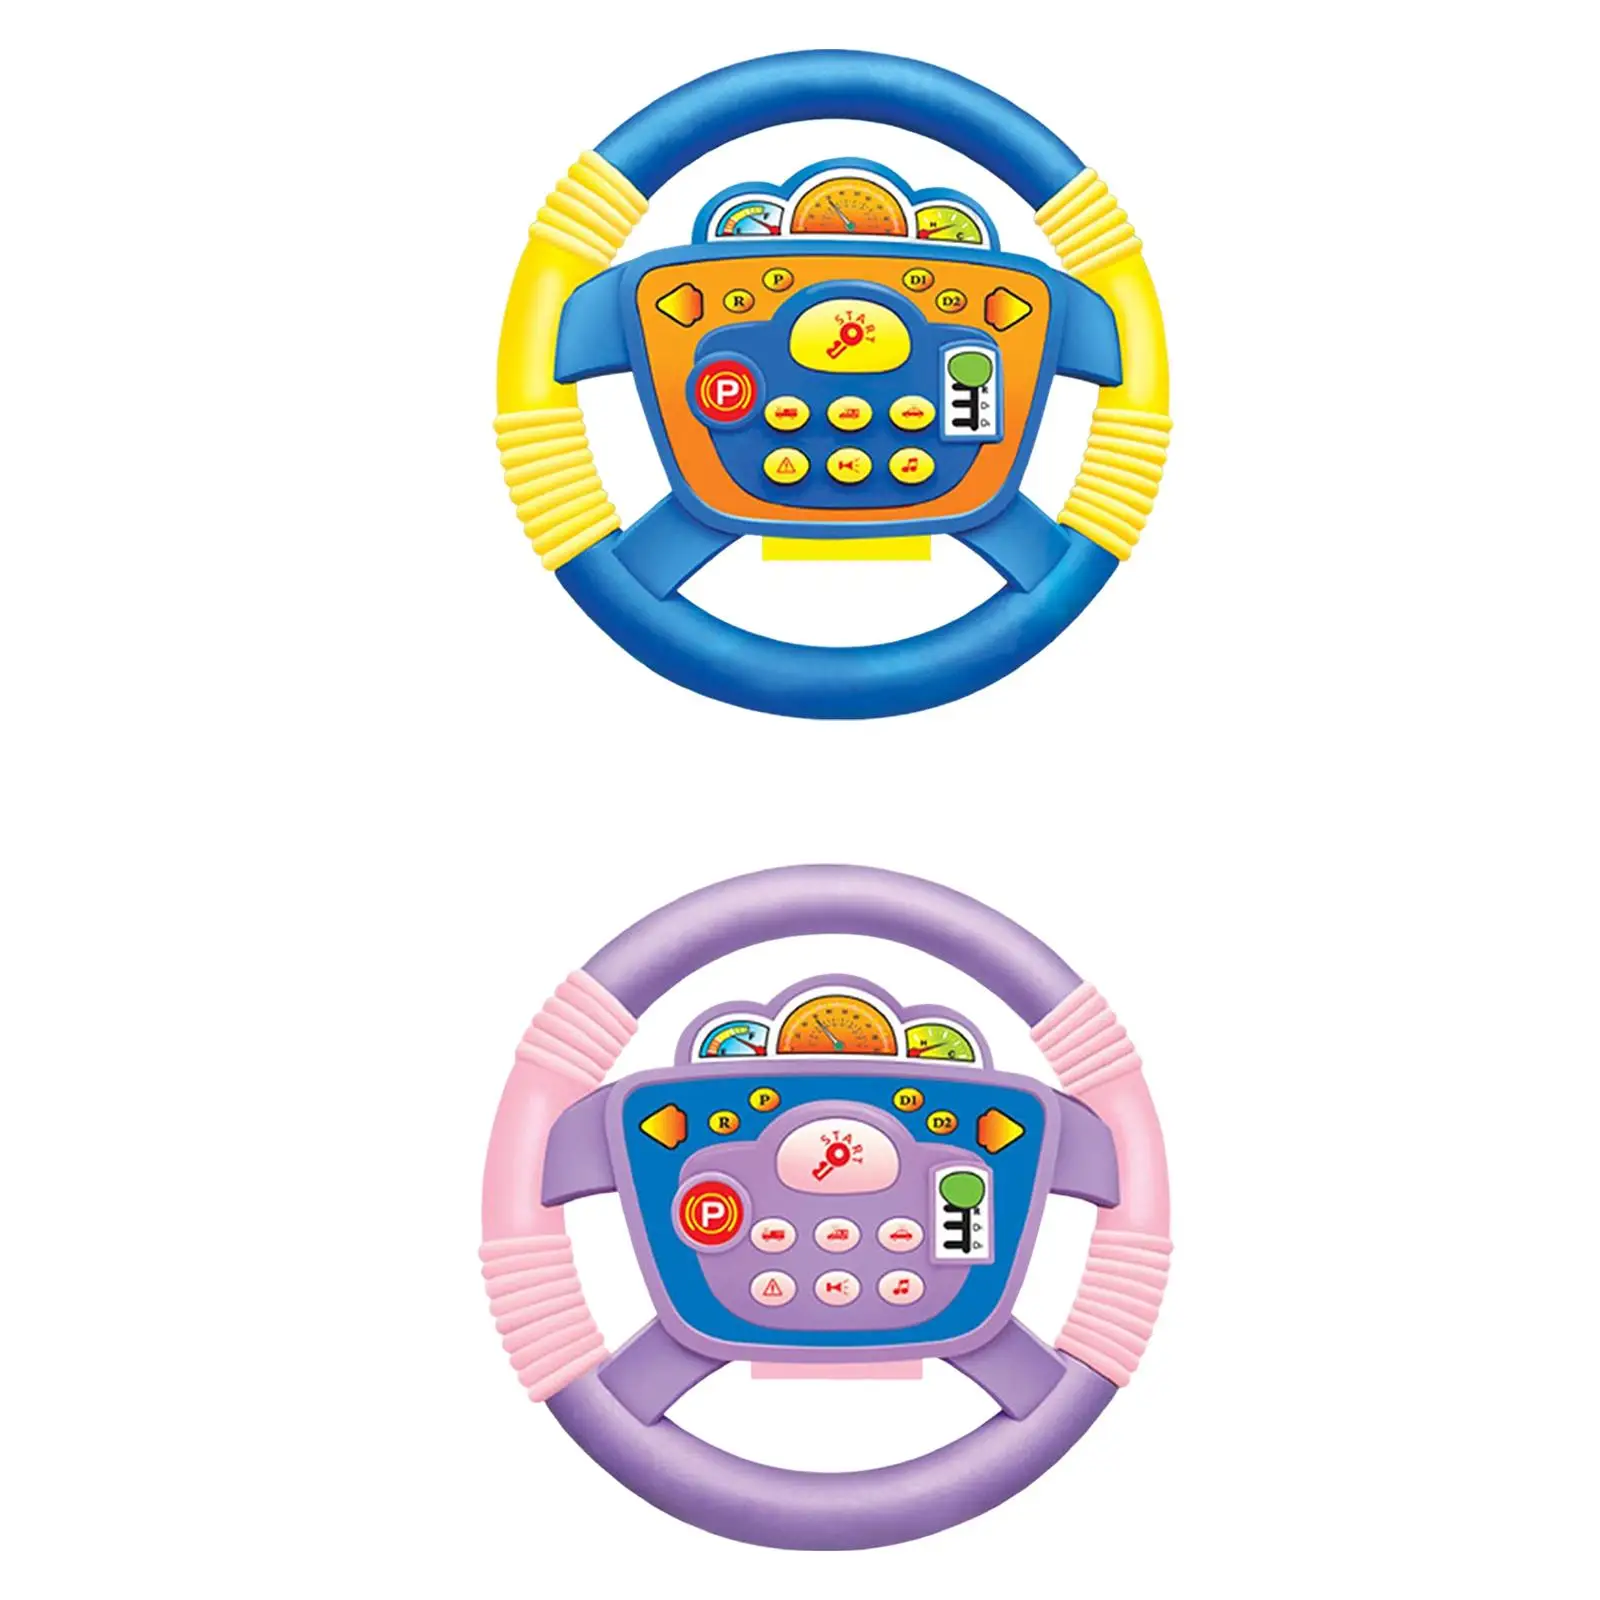 Driving Steering Wheel Toy Driving Controller Pretend Driving 360 Degree Rotation Funny Early Education Toy for Kids Toddlers